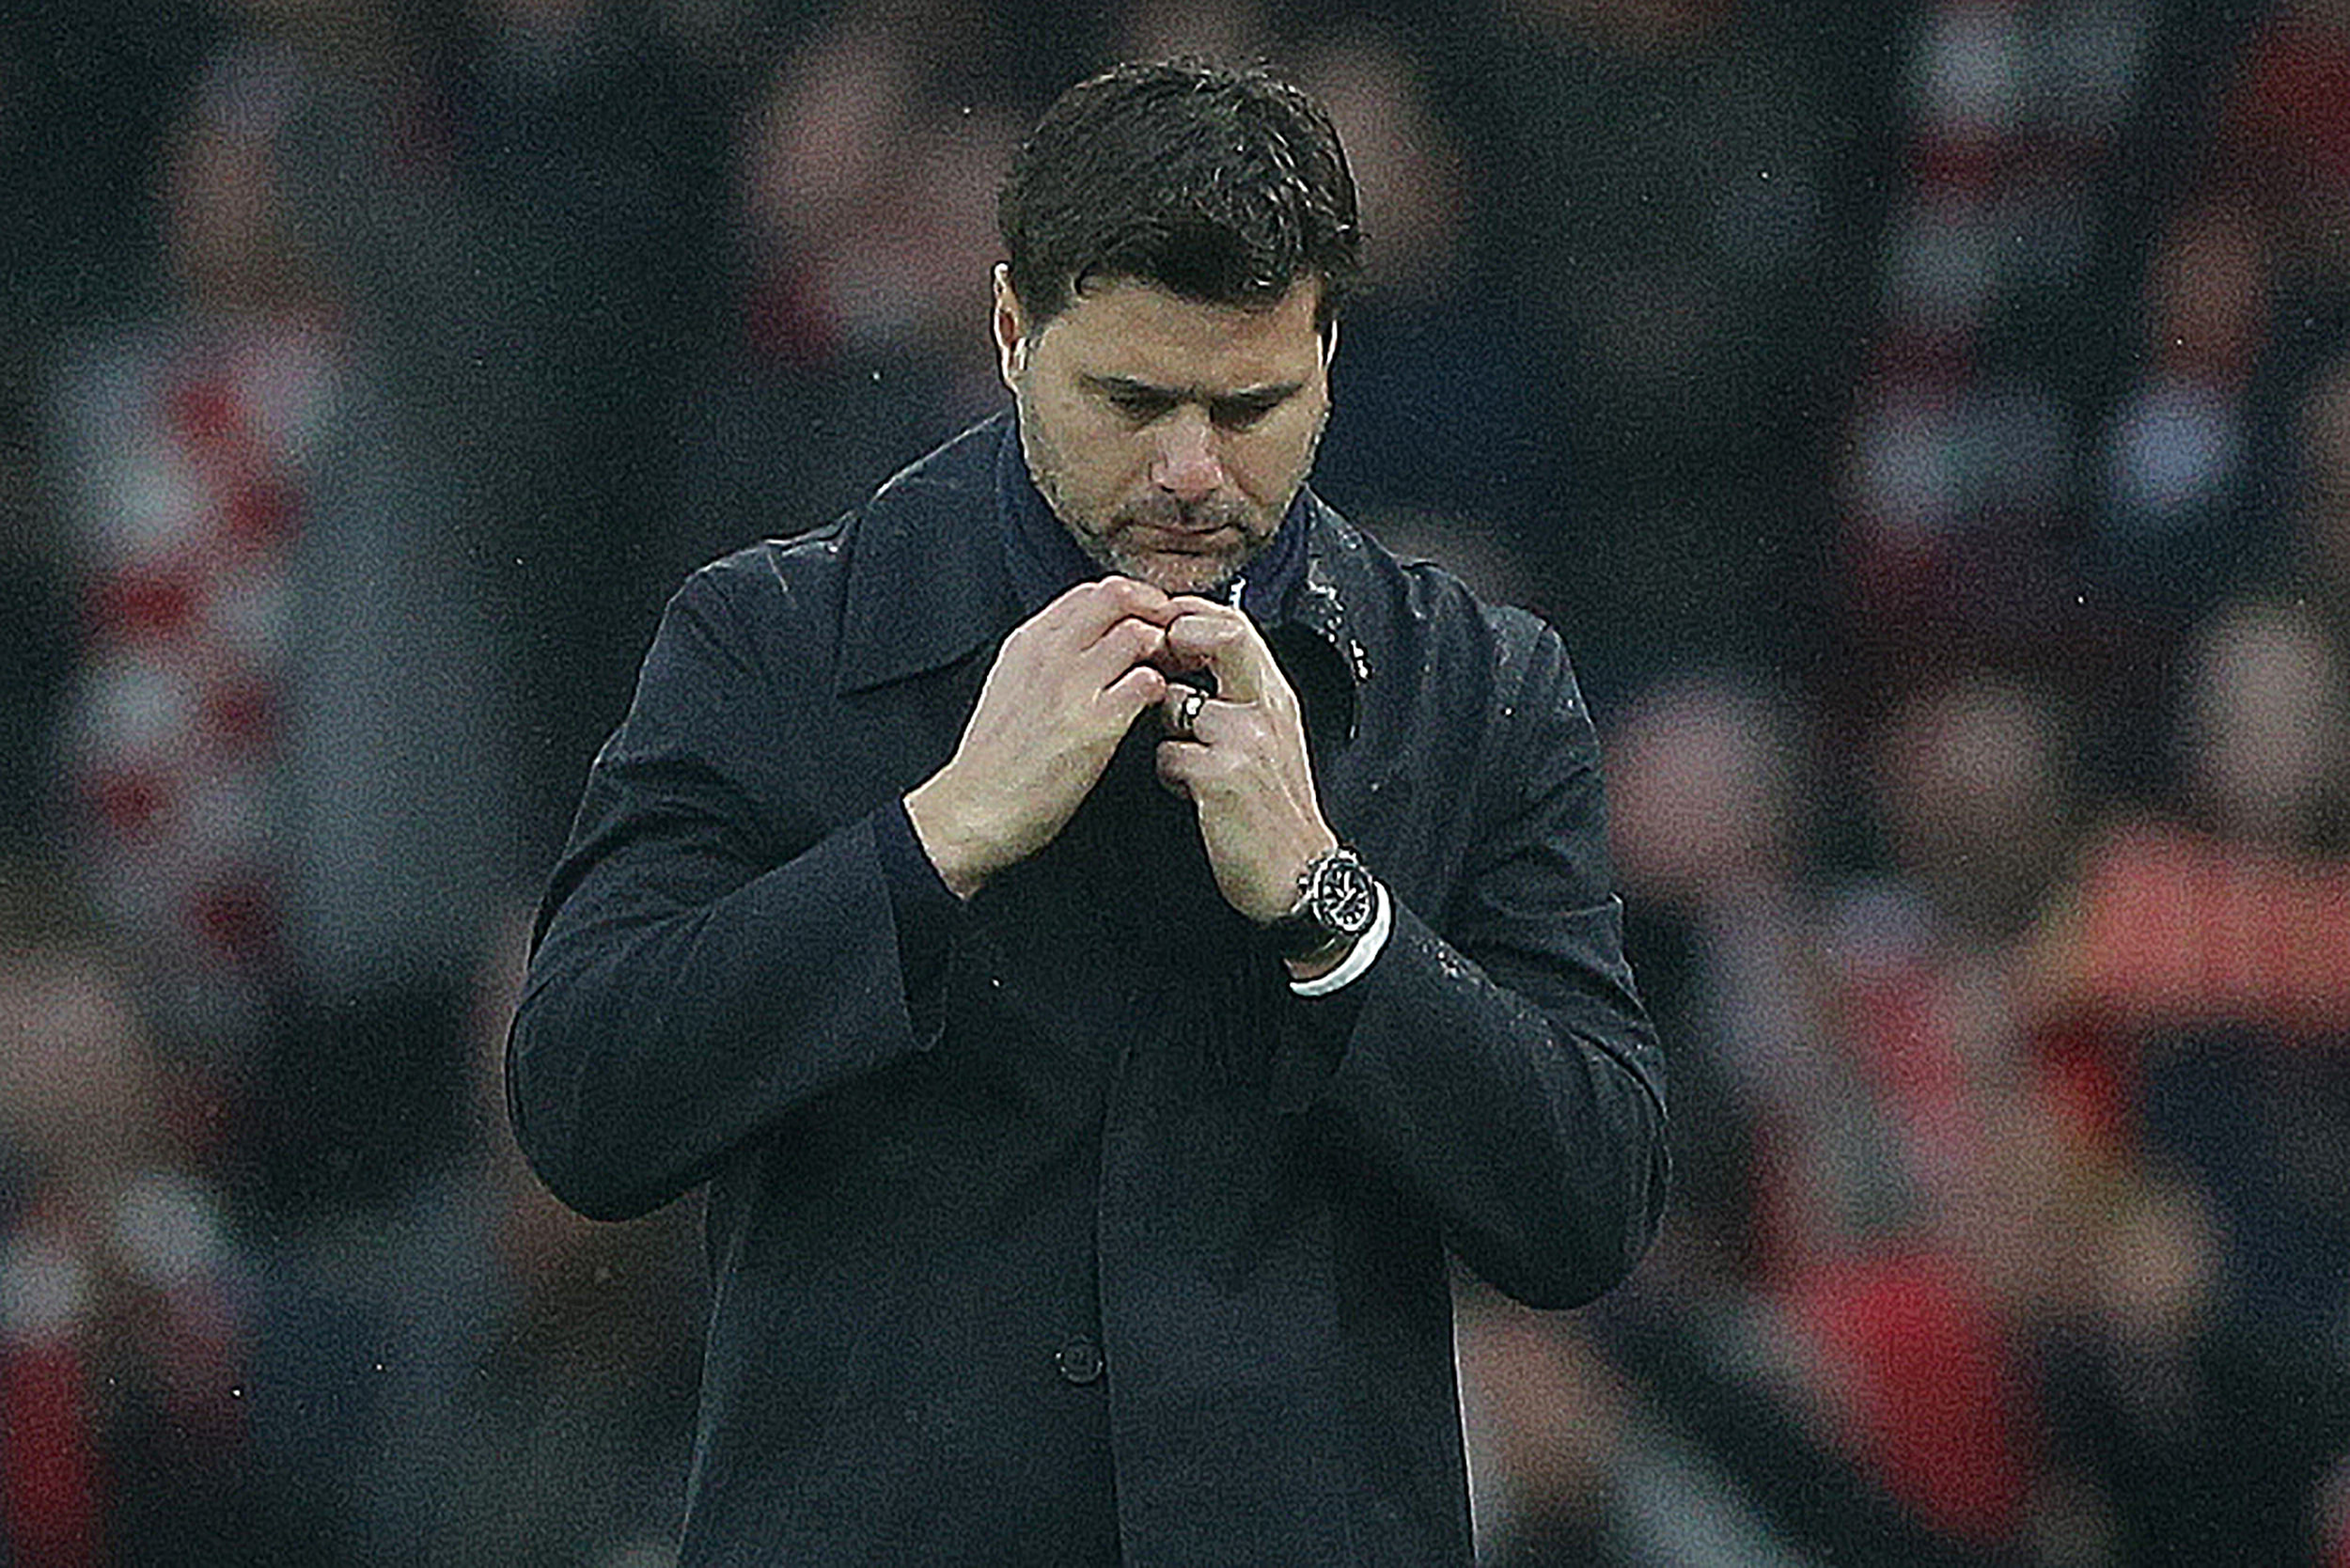 Tottenham Hotspur's Argentinian head coach Mauricio Pochettino racts following the English Premier League football match between Arsenal and Tottenham Hotspur at the Emirates Stadium in London on November 18, 2017.  / AFP PHOTO / Daniel LEAL-OLIVAS / RESTRICTED TO EDITORIAL USE. No use with unauthorized audio, video, data, fixture lists, club/league logos or 'live' services. Online in-match use limited to 75 images, no video emulation. No use in betting, games or single club/league/player publications.  /         (Photo credit should read DANIEL LEAL-OLIVAS/AFP/Getty Images)